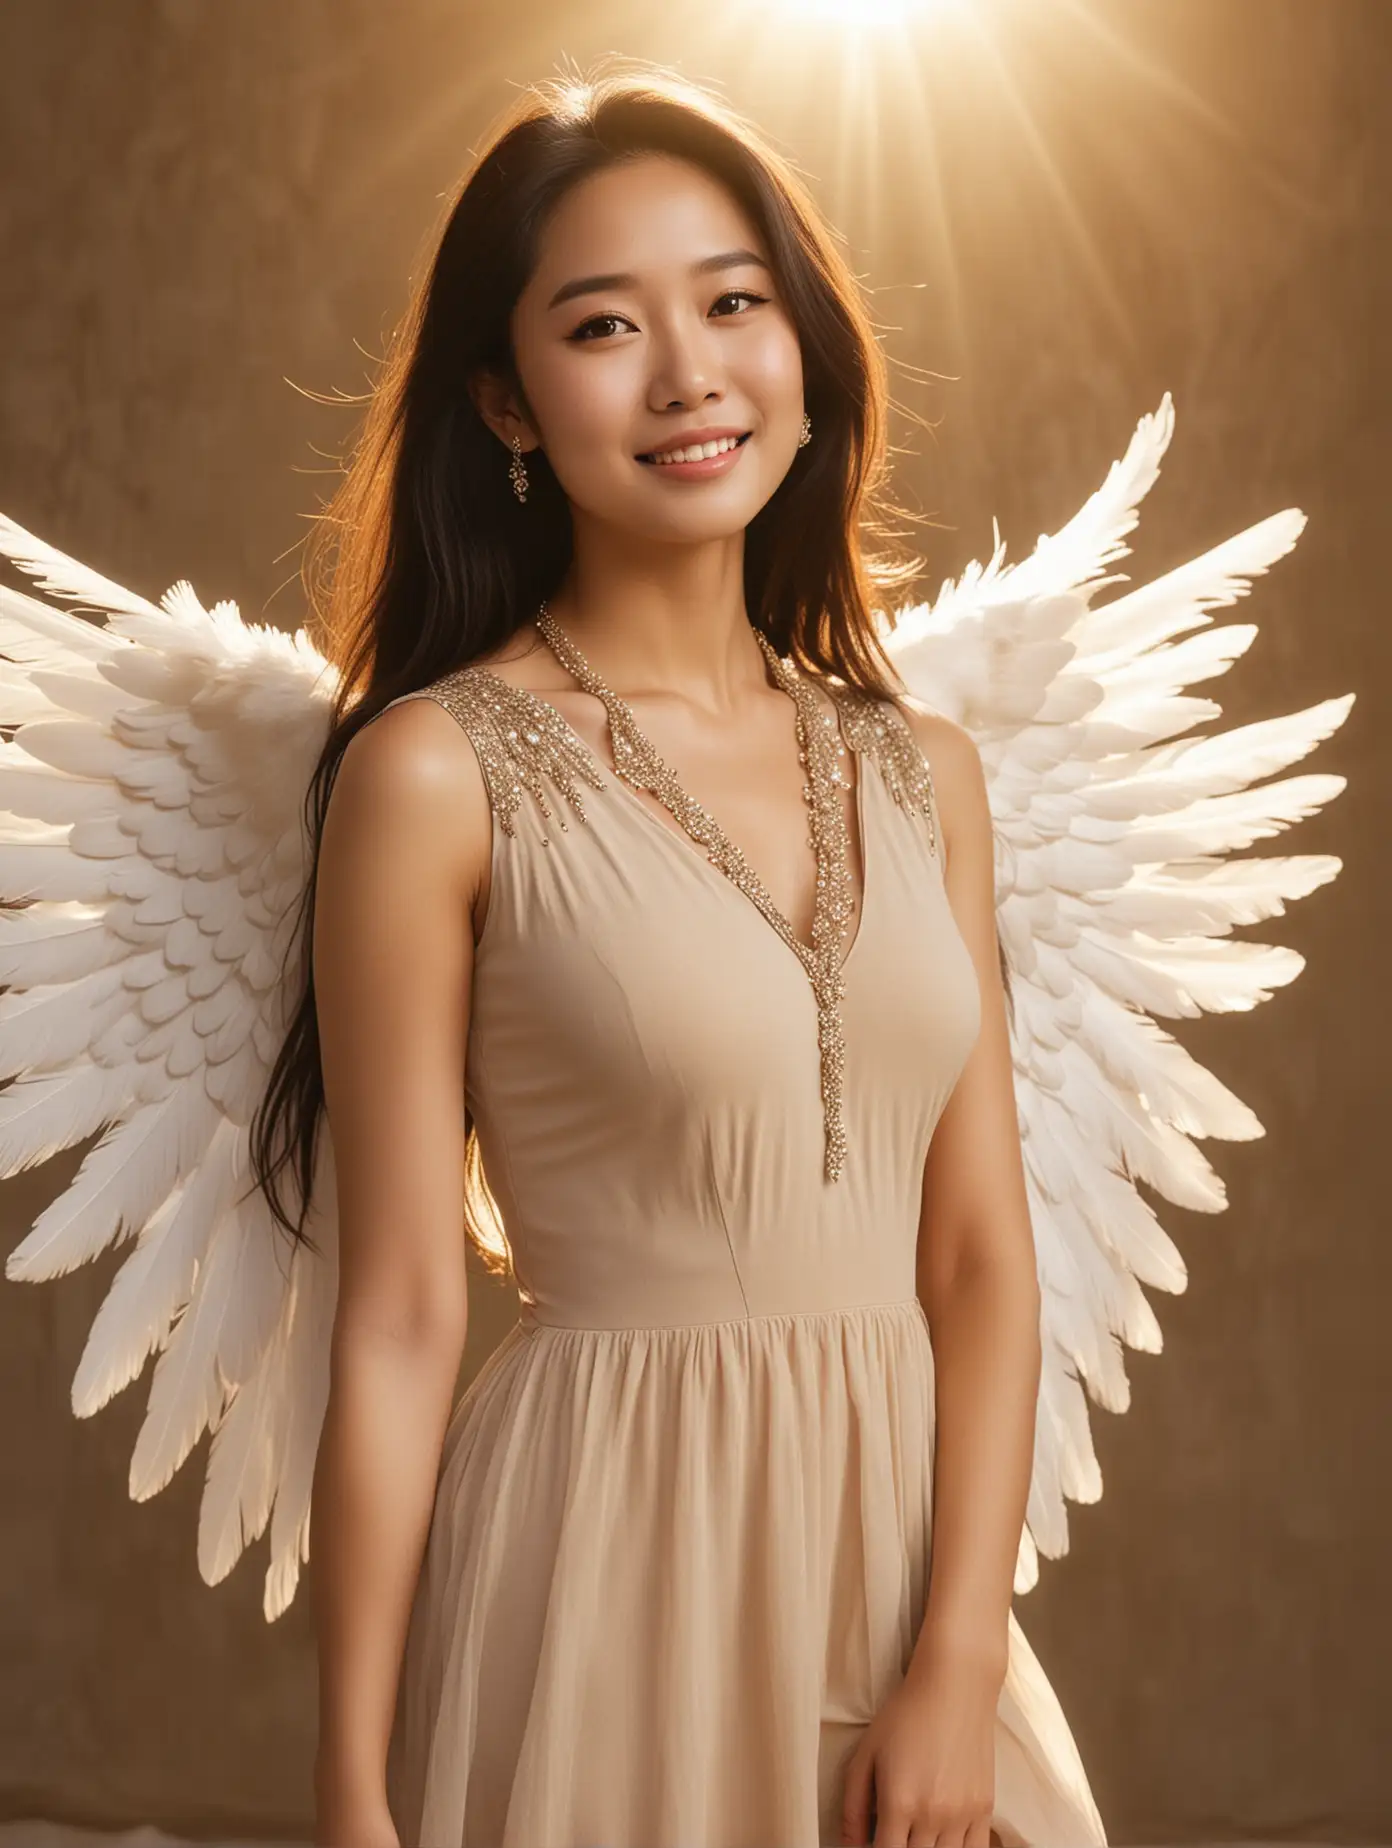 Confident Angelic Woman in Beige Dress with White Wings and Jewelry